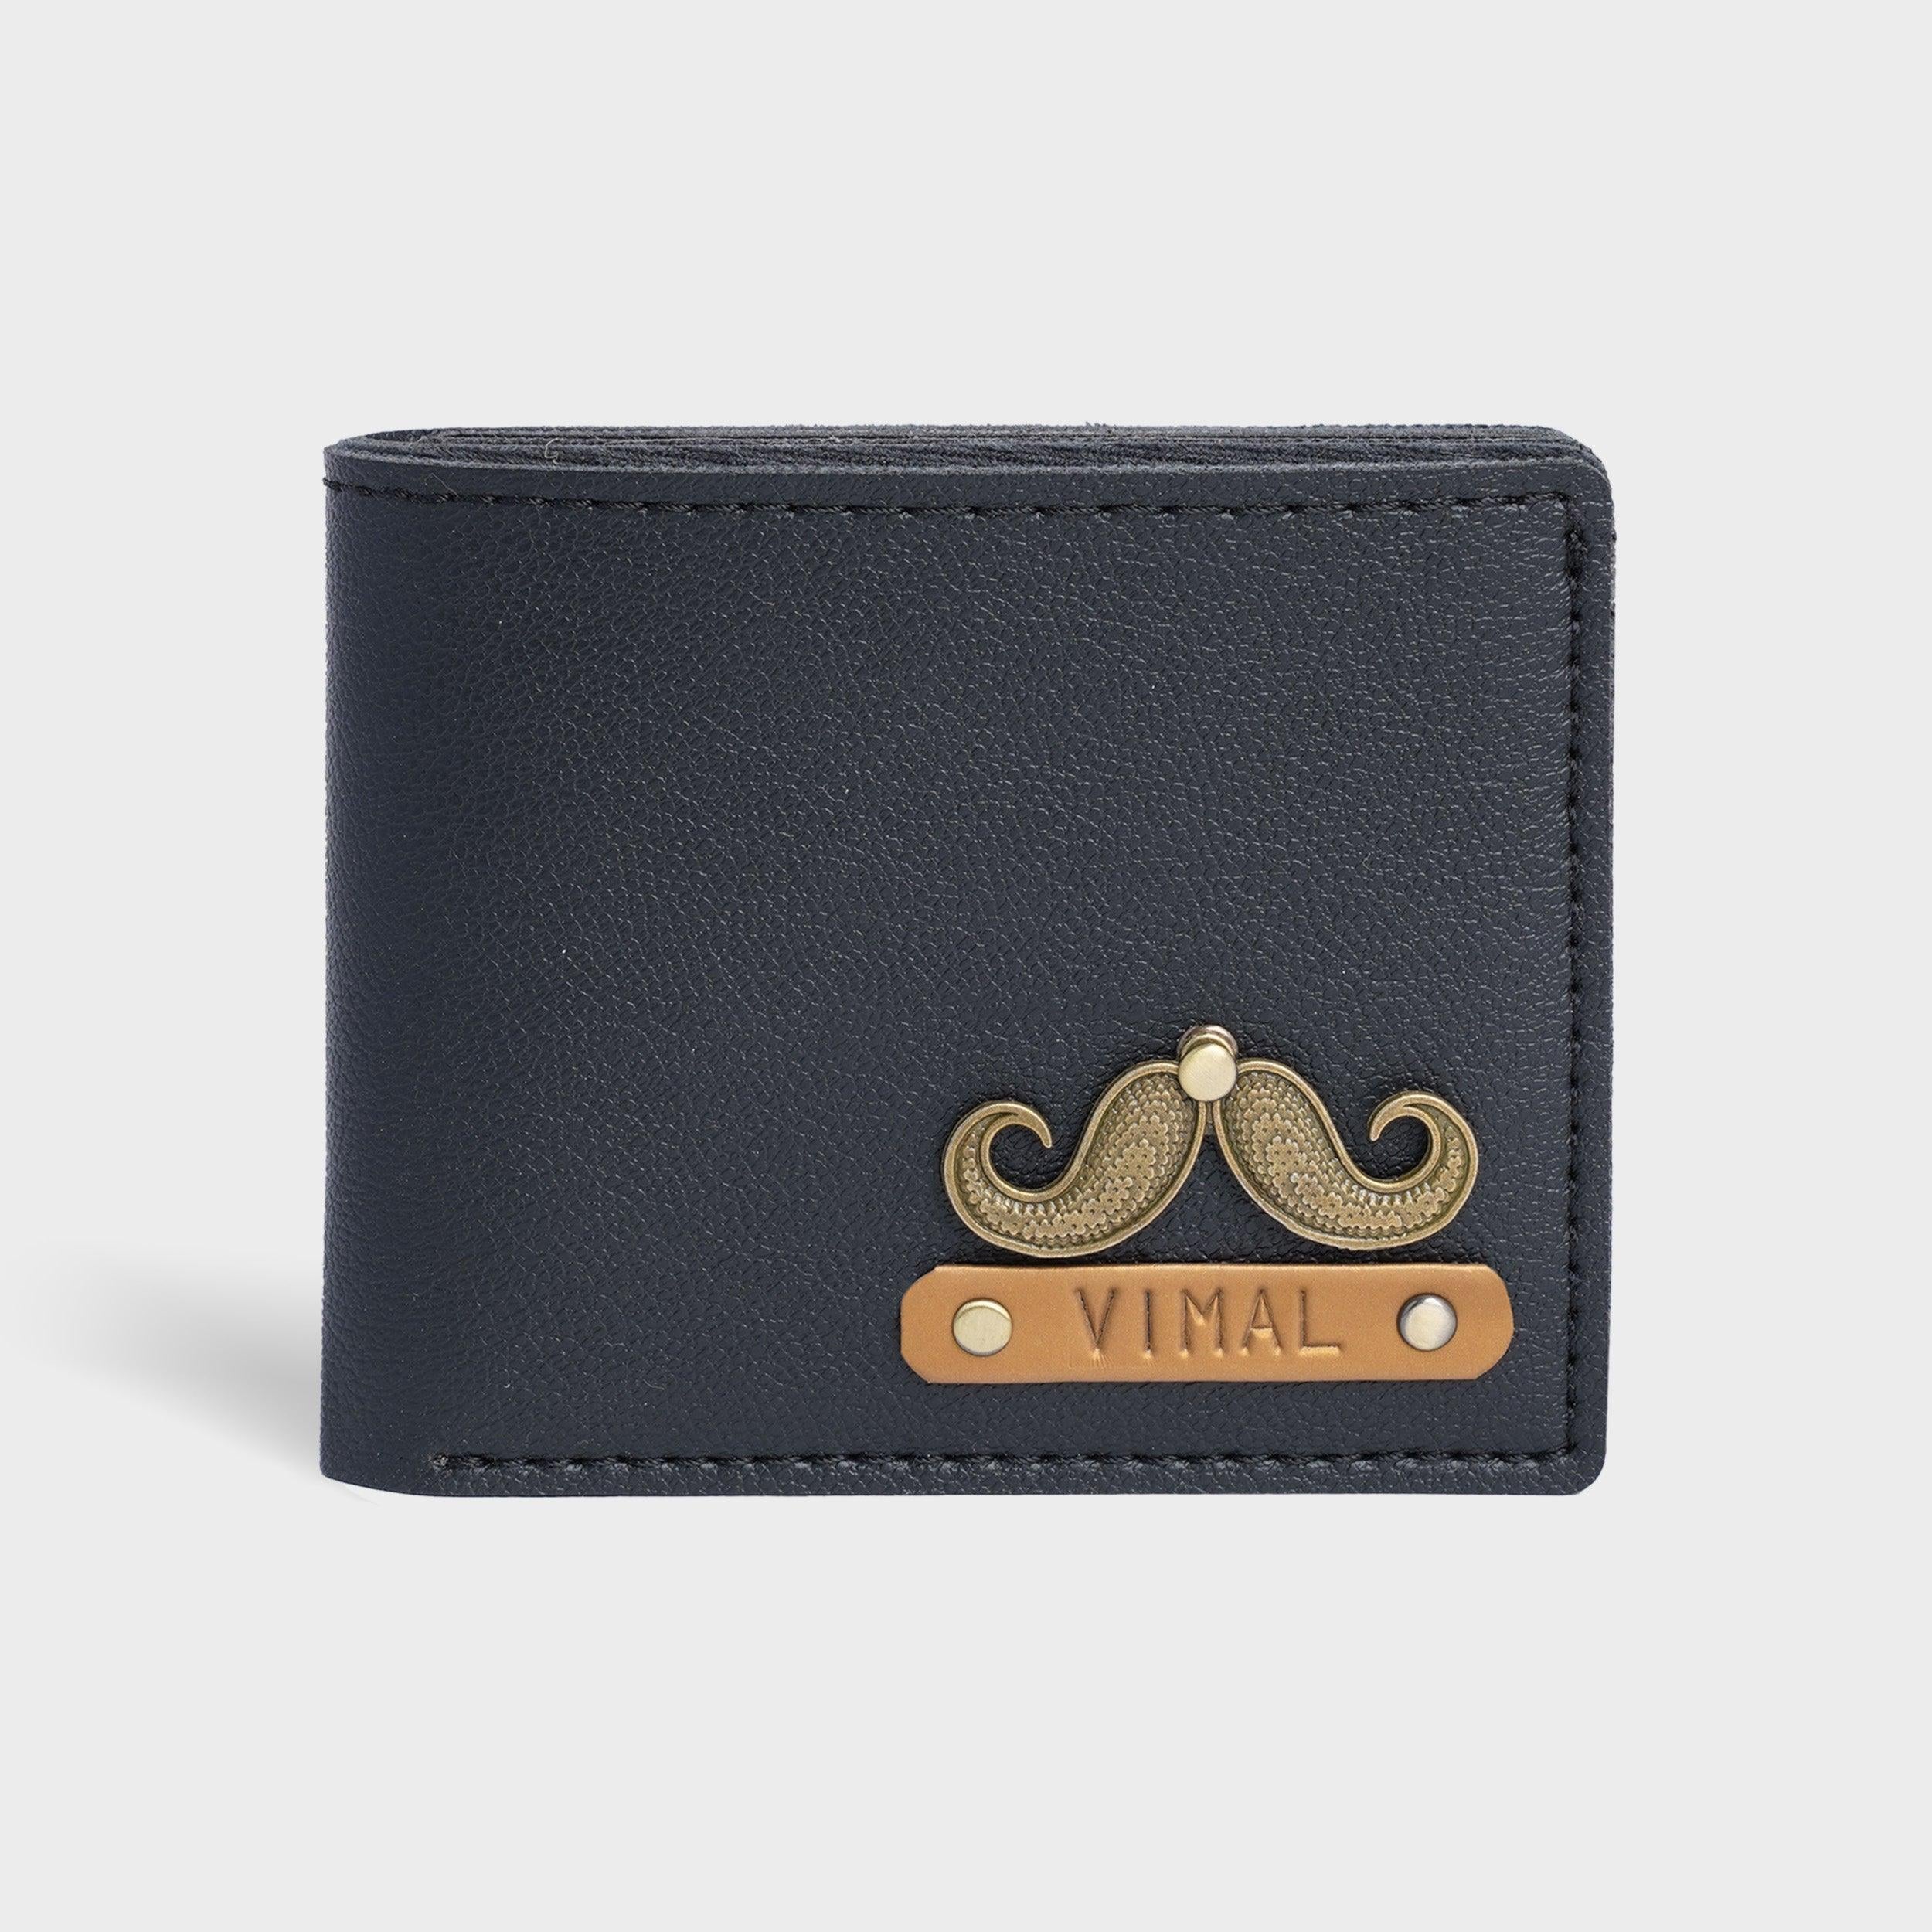 Personalised Men's Wallet With Name at Rs 790 | Chennai | ID: 22535564530